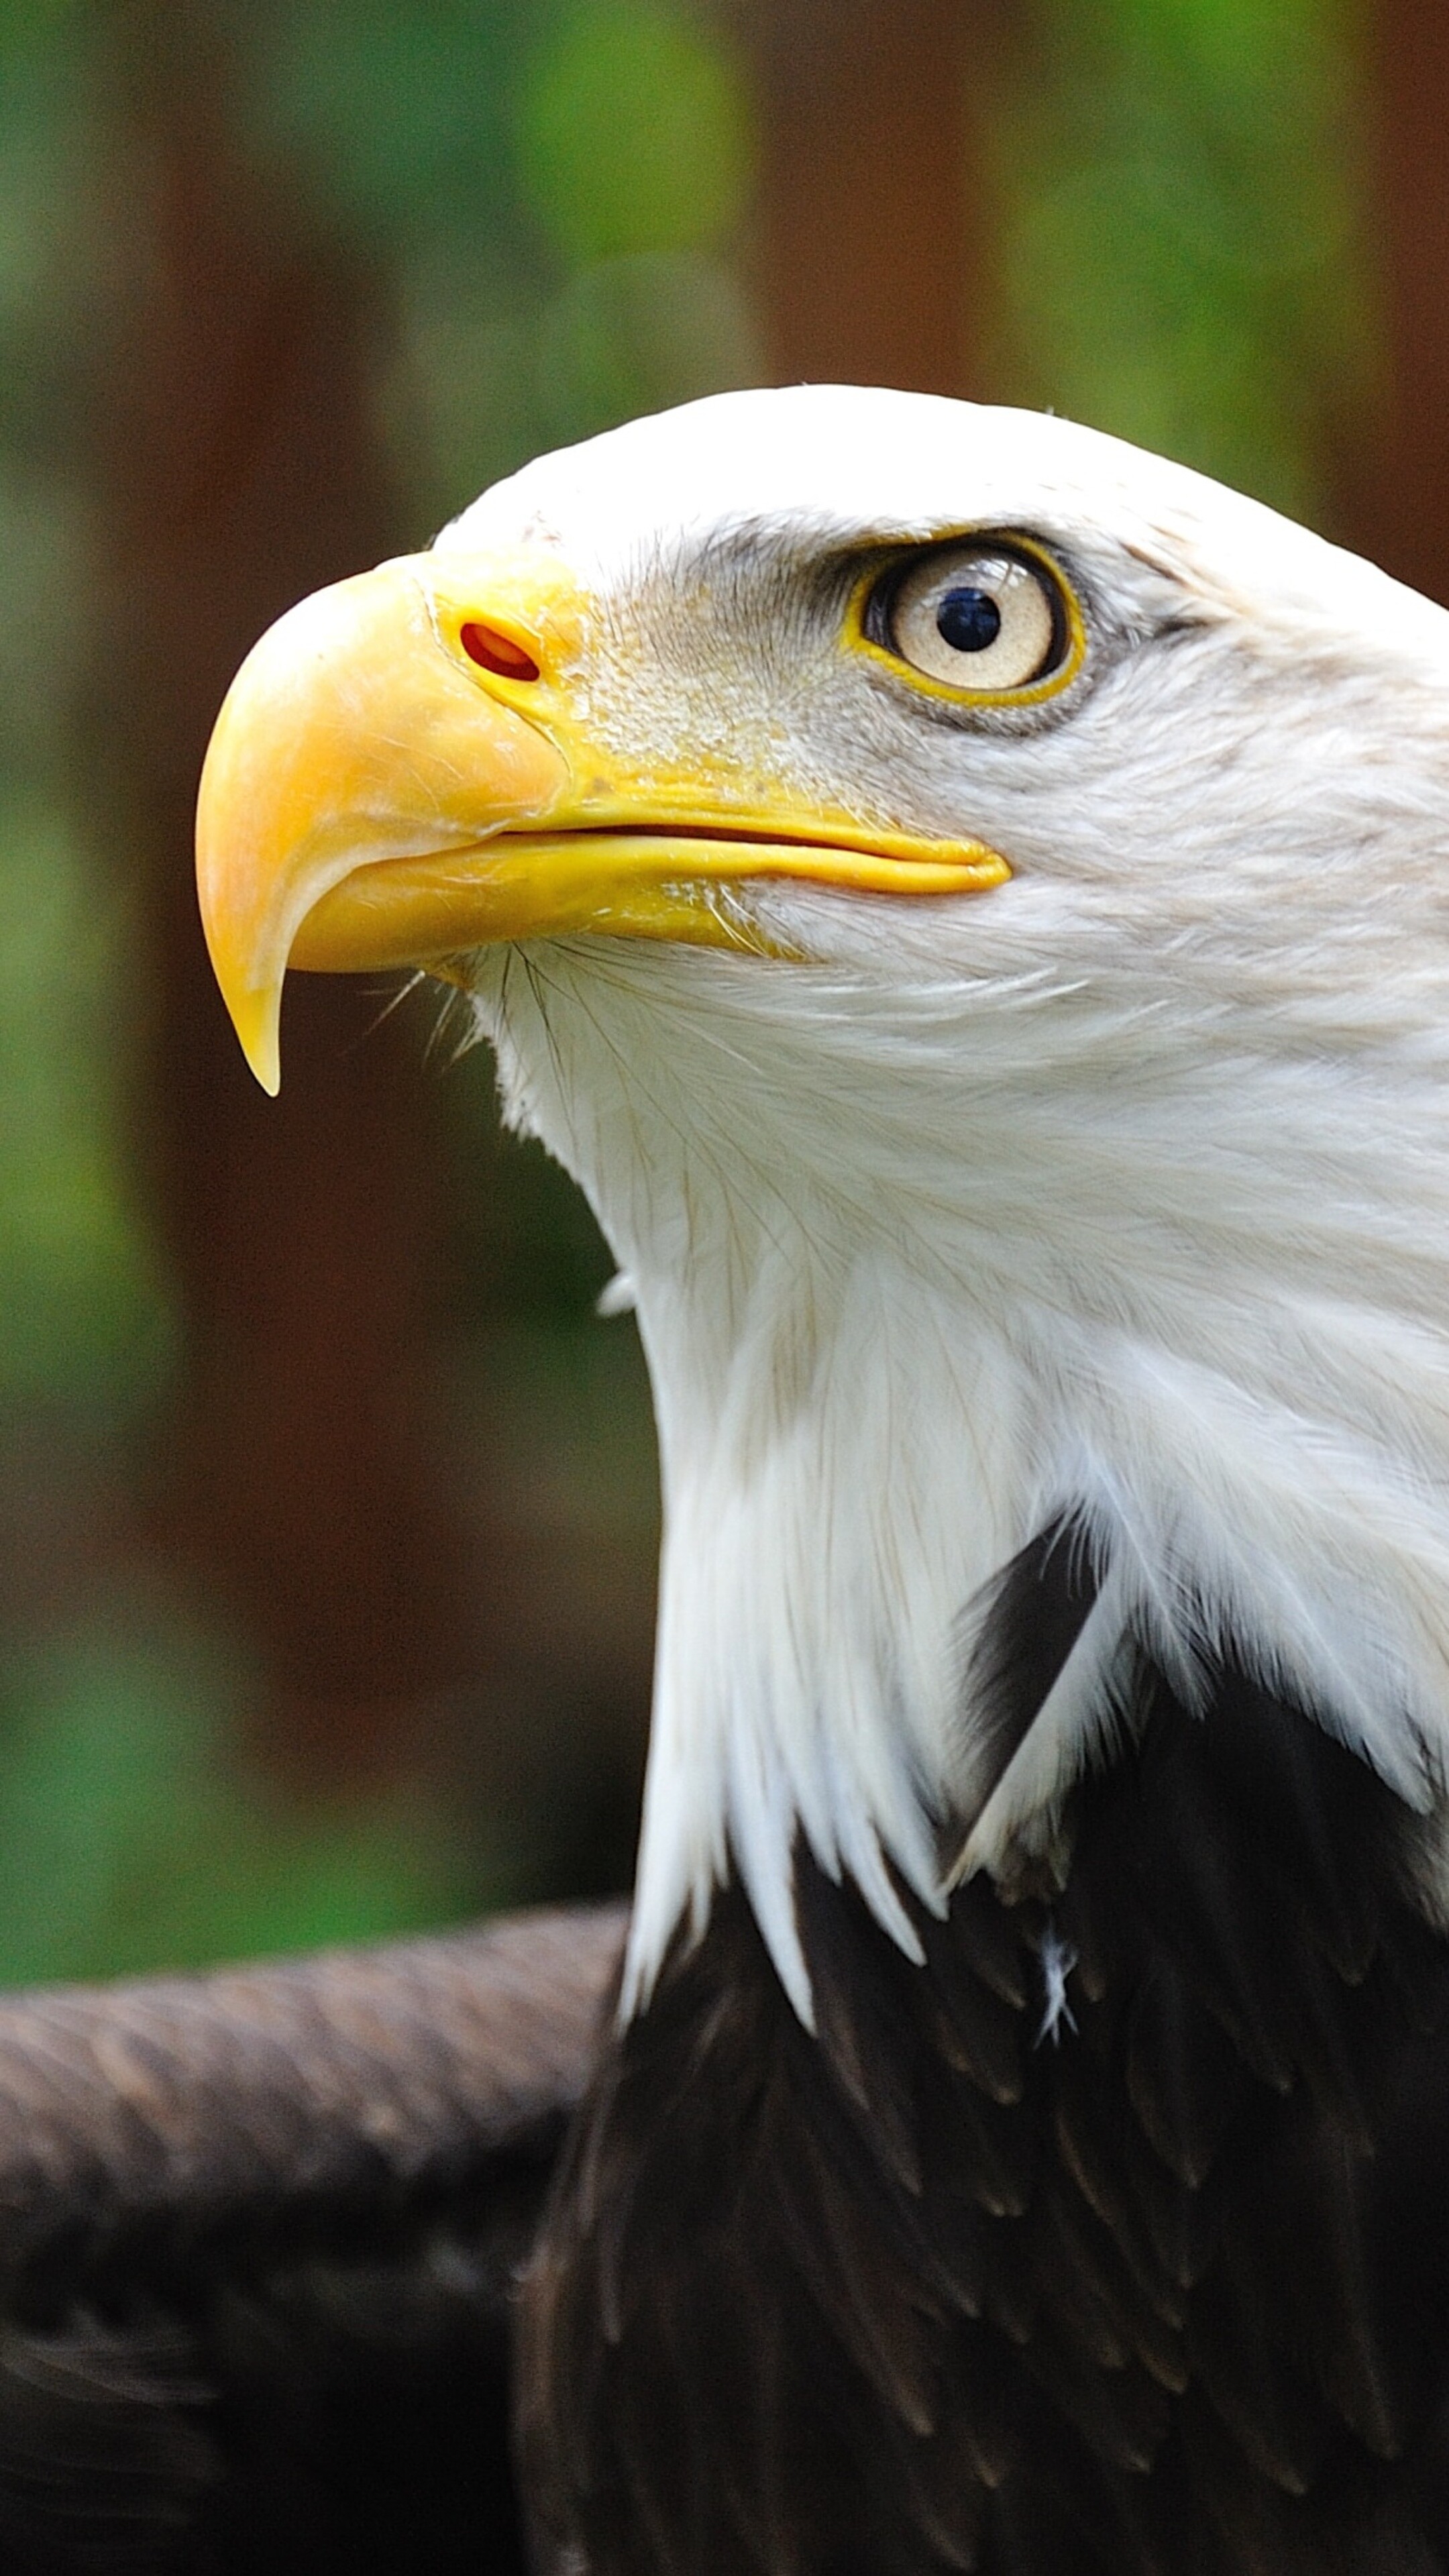 Eagle: The eagles are generally distributed in all types of habitats and nearly all parts of the world. 2160x3840 4K Wallpaper.